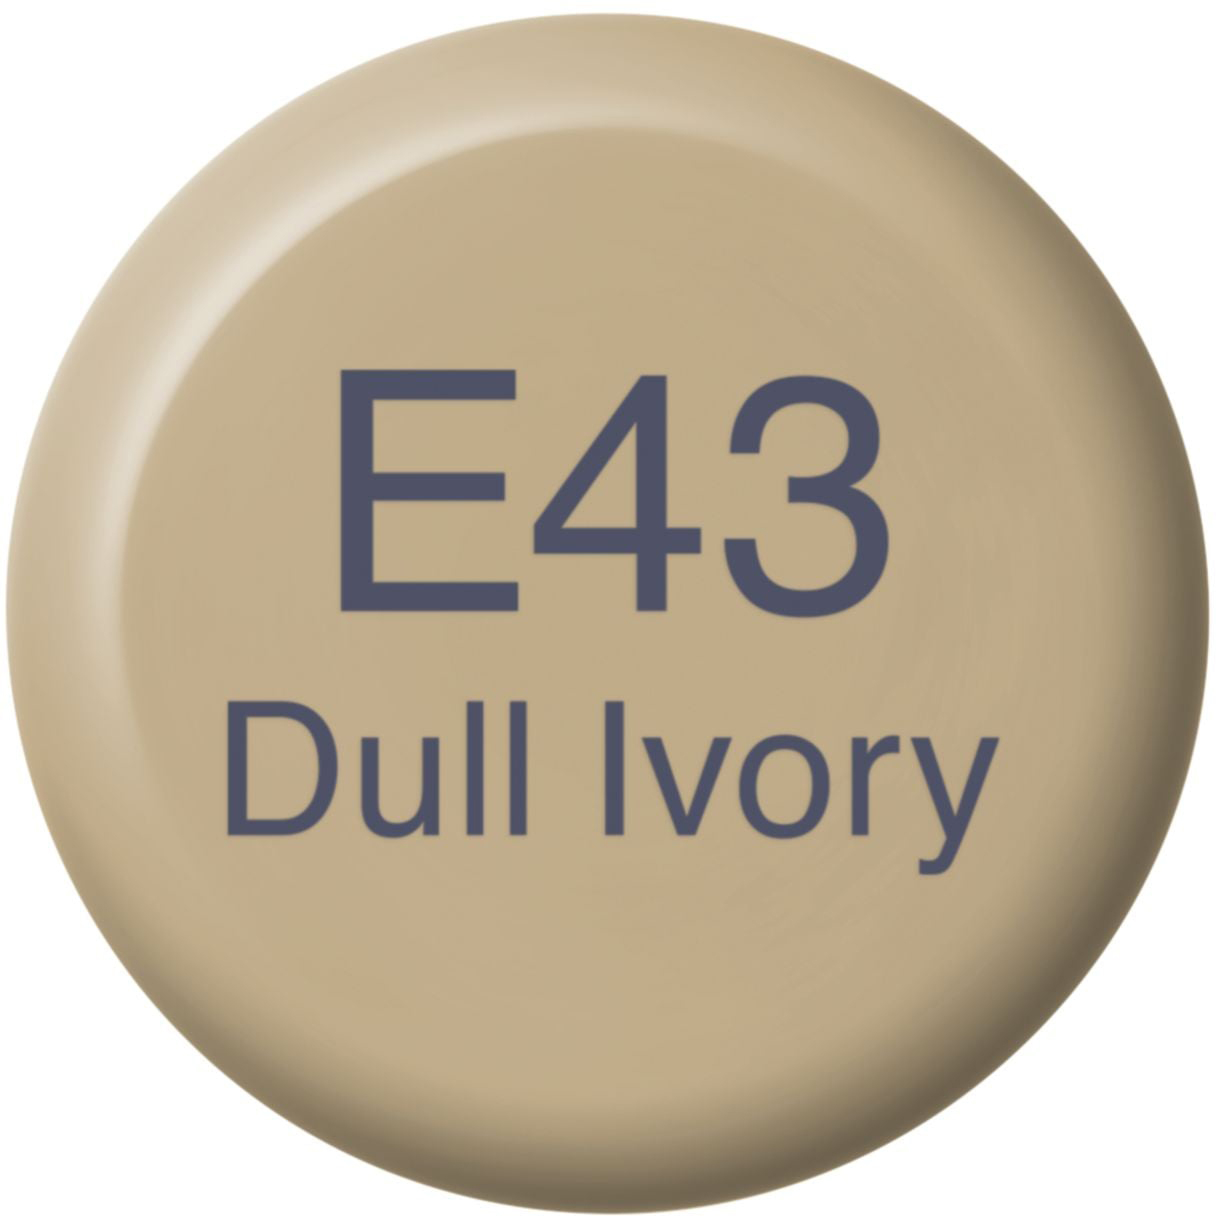 COPIC Ink Refill 21076235 E43 - Dull Ivory E43 - Dull Ivory